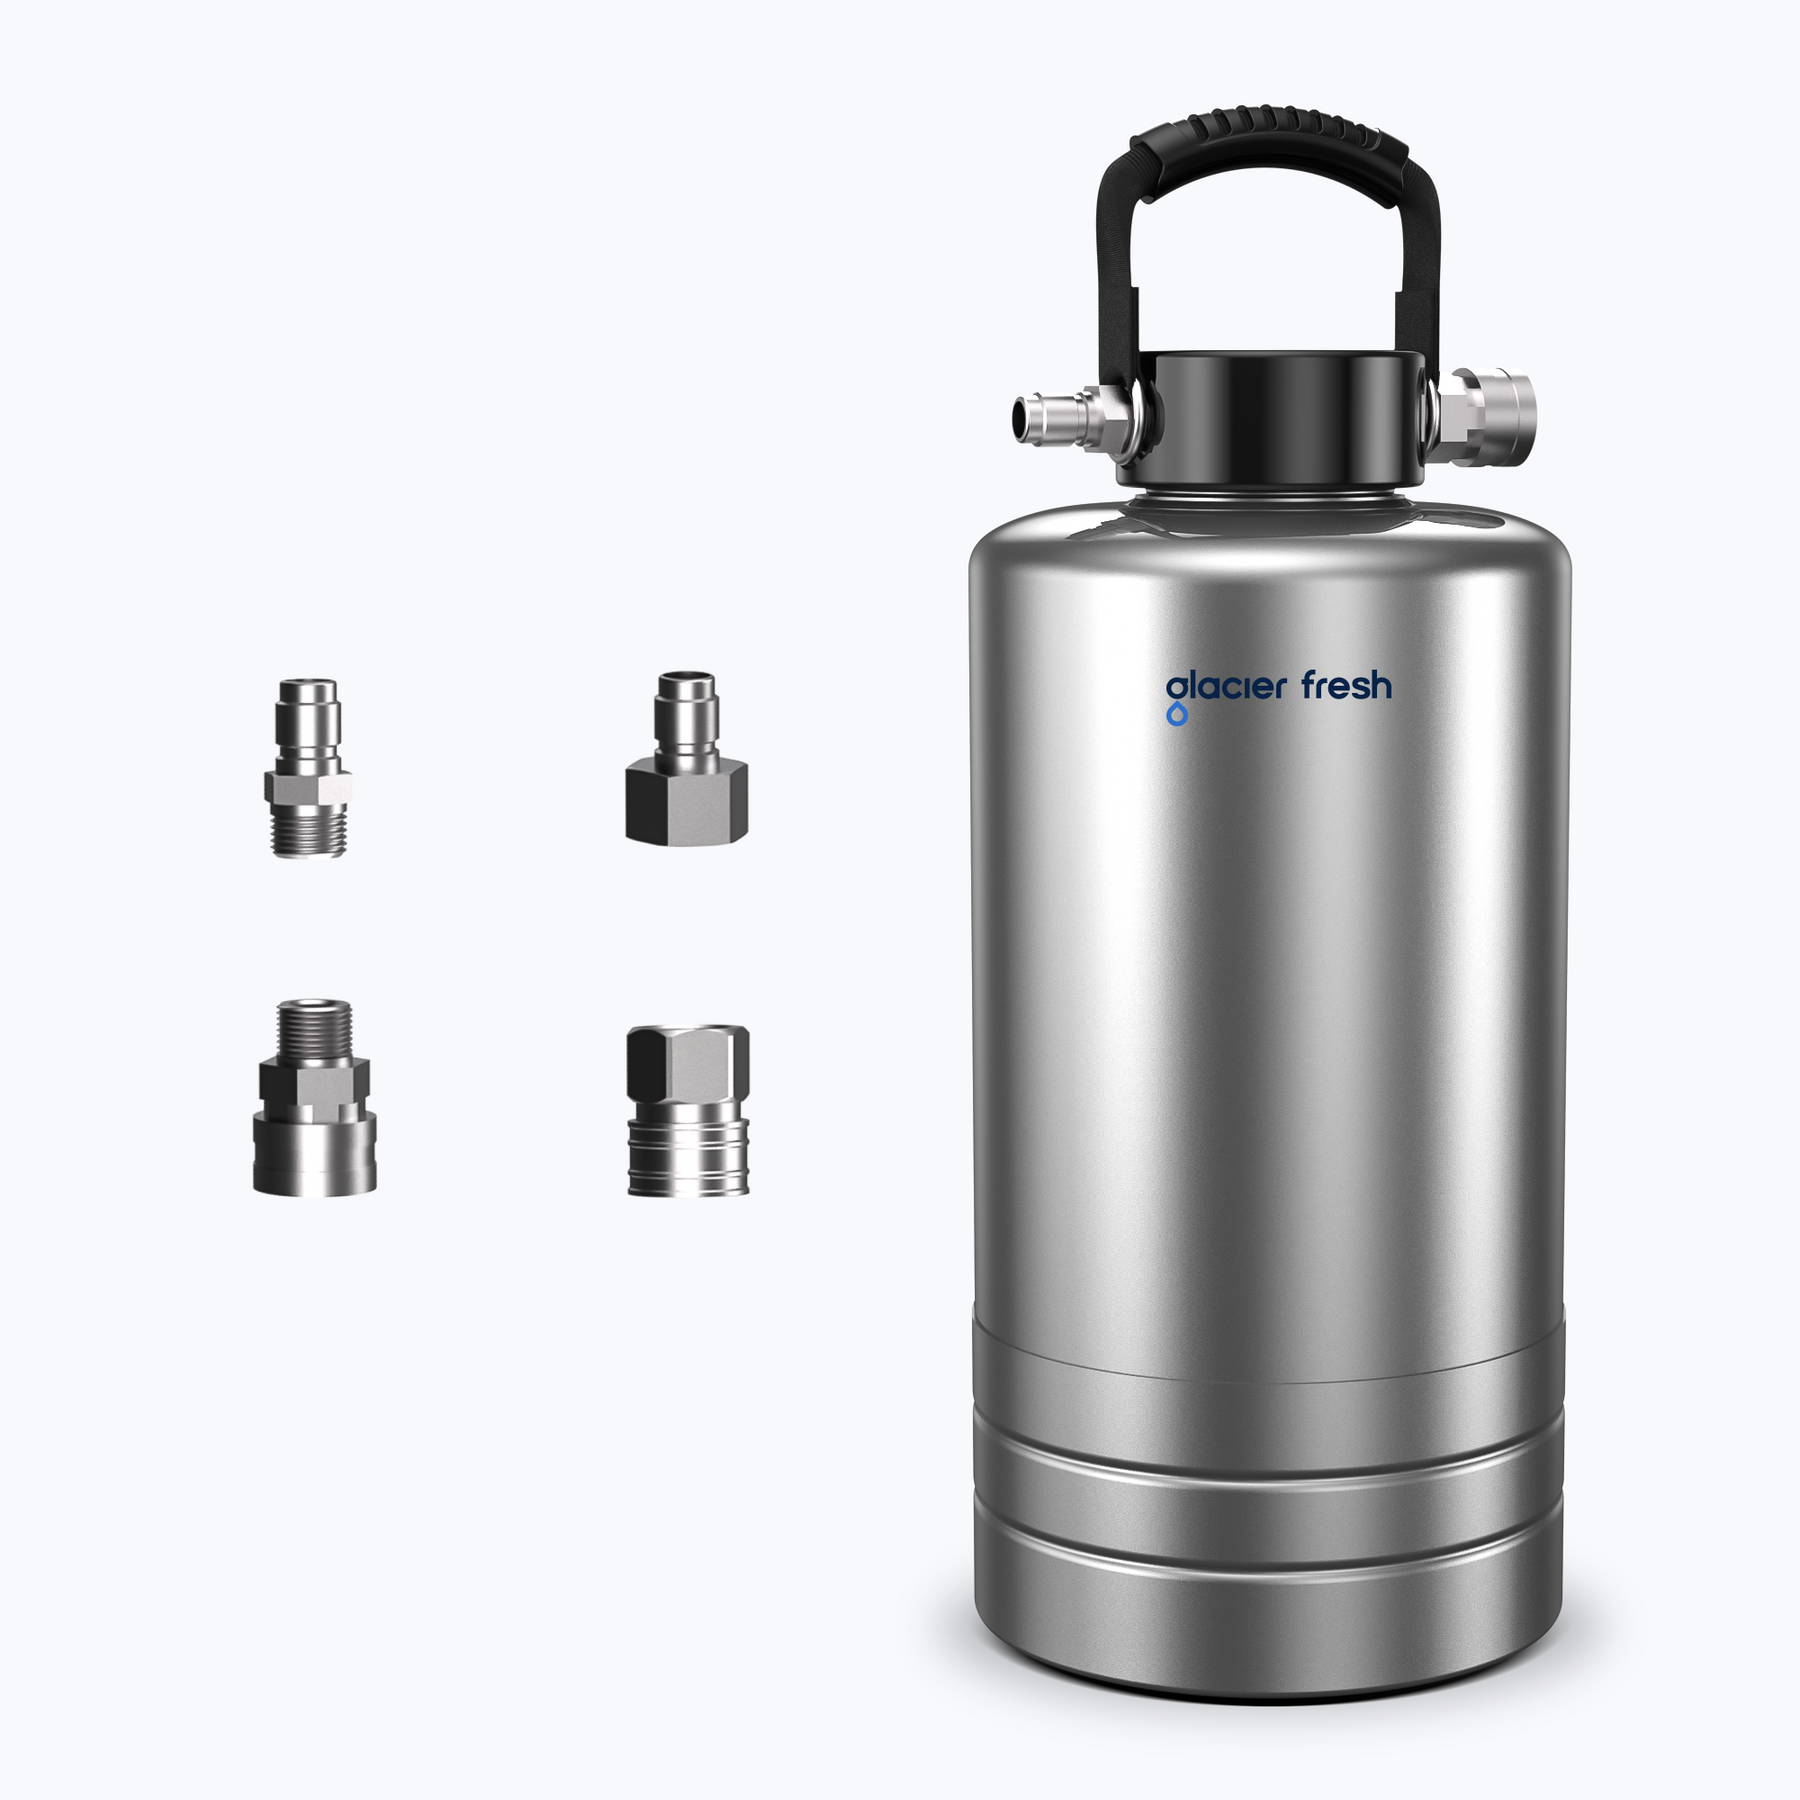 Glacierfresh Portable RV Water Softener, 16,000 Grain with Stainless Steel Garden Hose Quick Connects for RVs